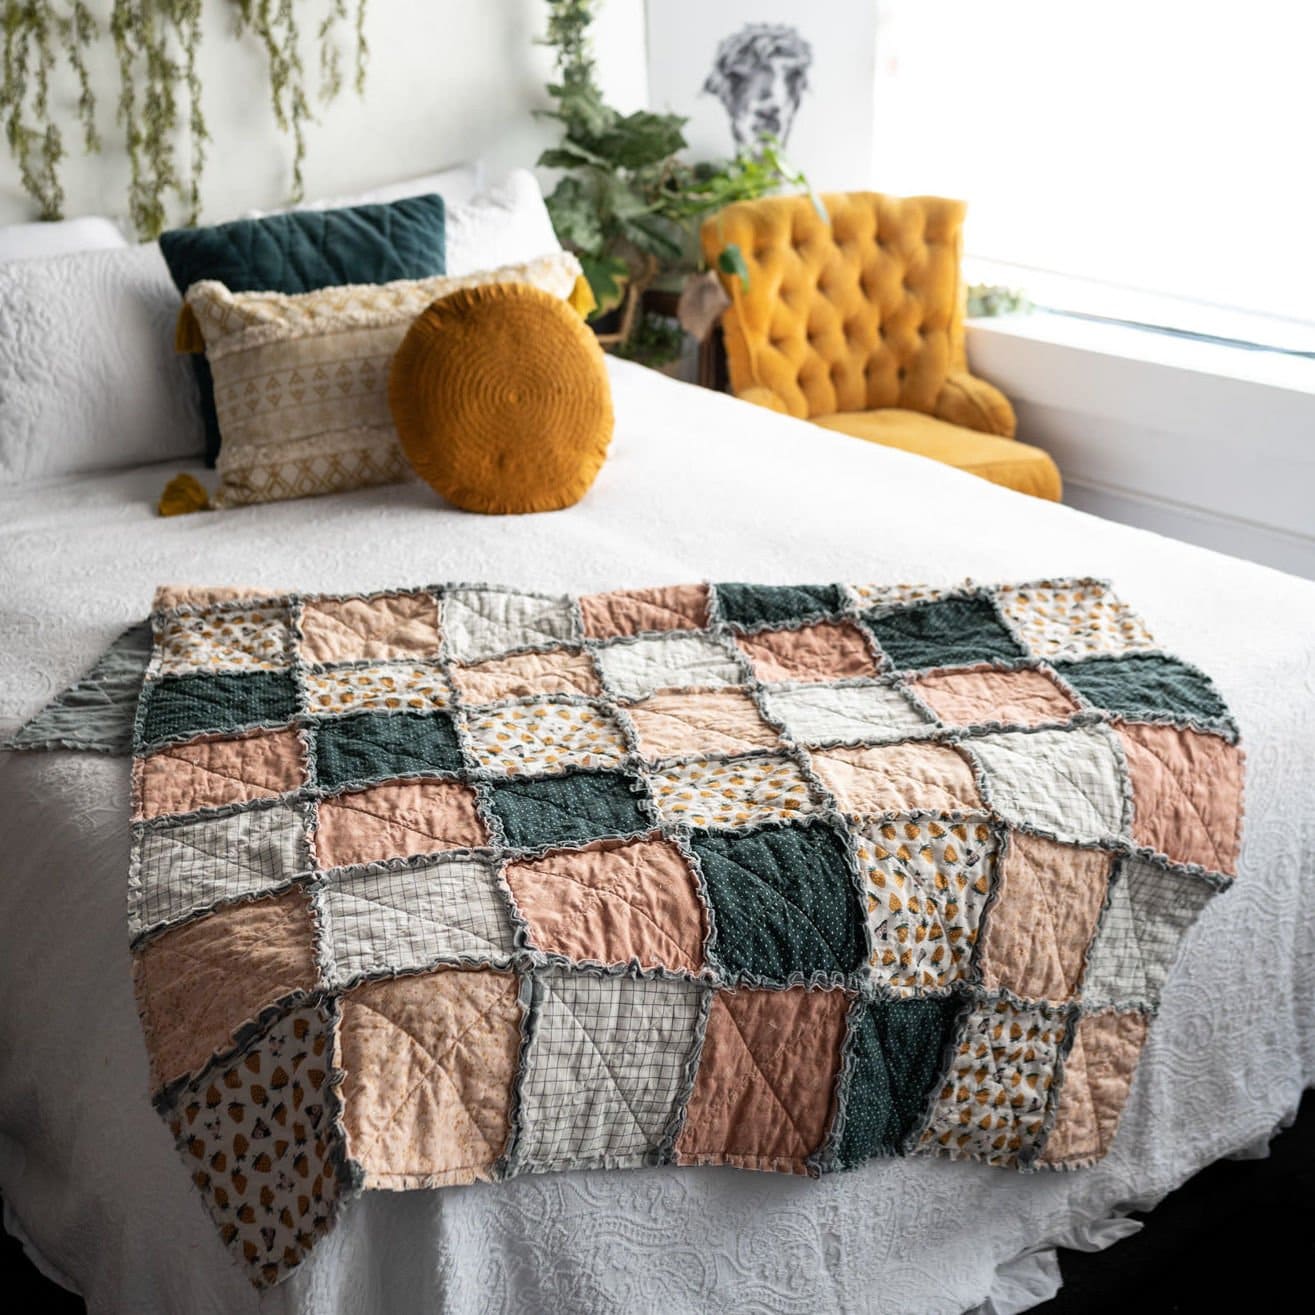 How To Make A Rag Quilt